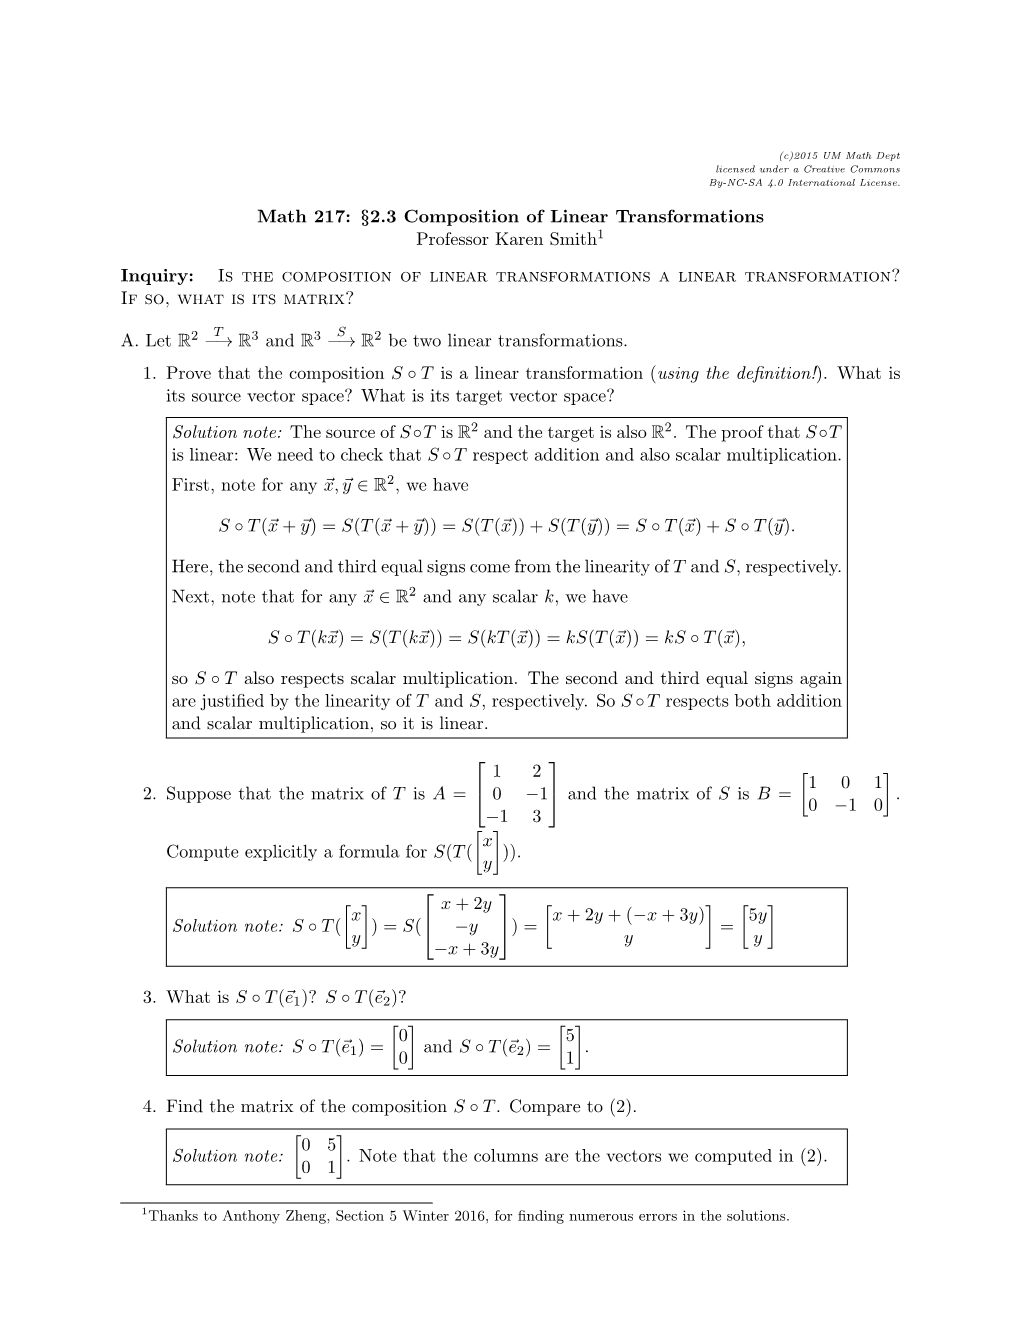 Compositions of Linear Transformations